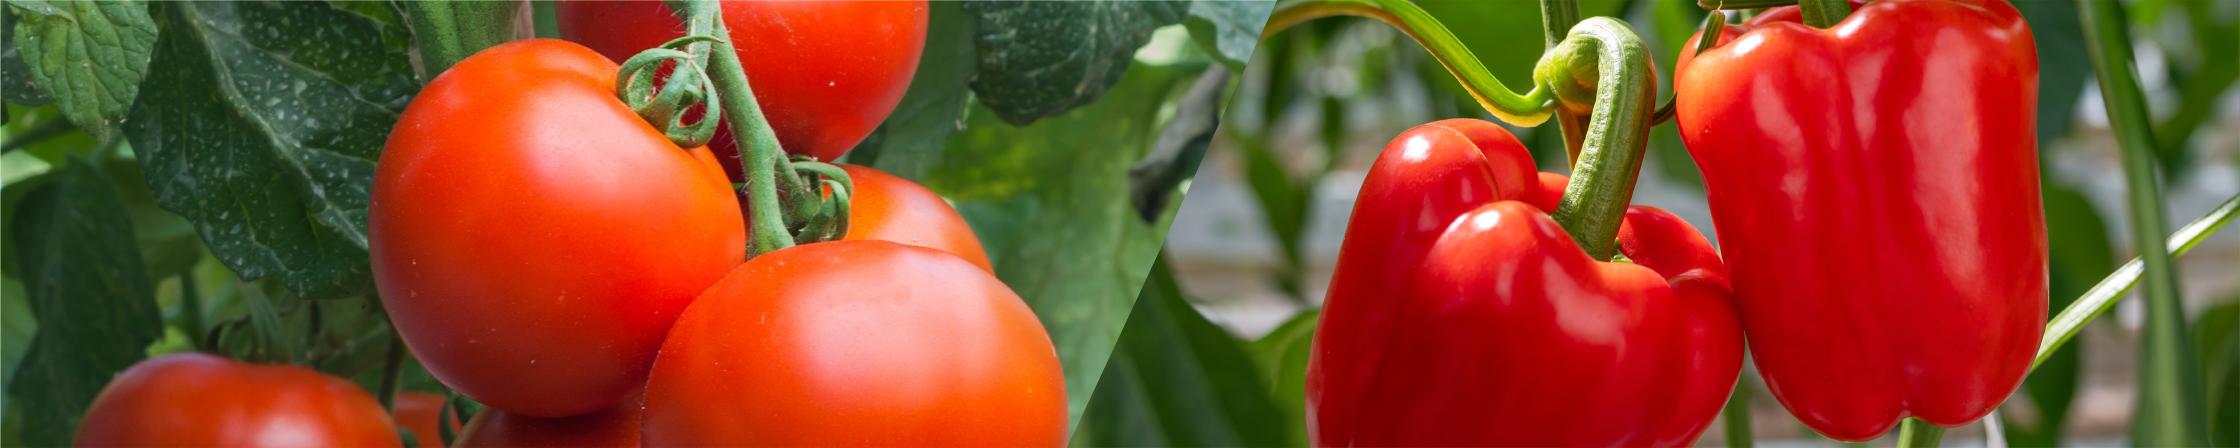 Tomatoes and Peppers Header